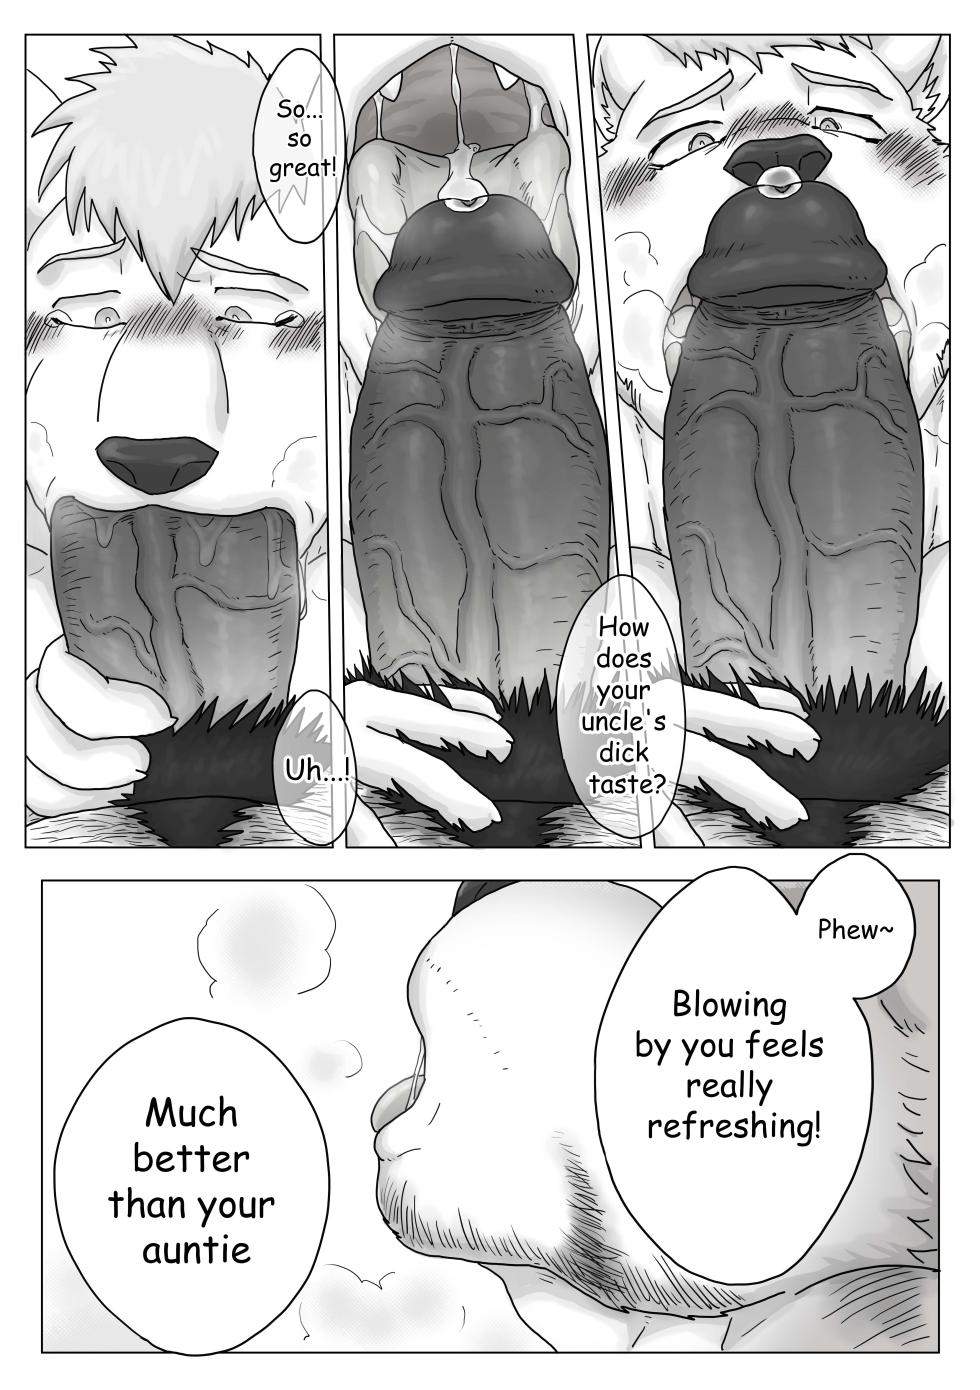 [Renoky] Jikka no Ossan wa Daisukebe!! | My hometown‘s uncle is a Horny Hung!! [English] [Decensored] [Digital] - Page 18